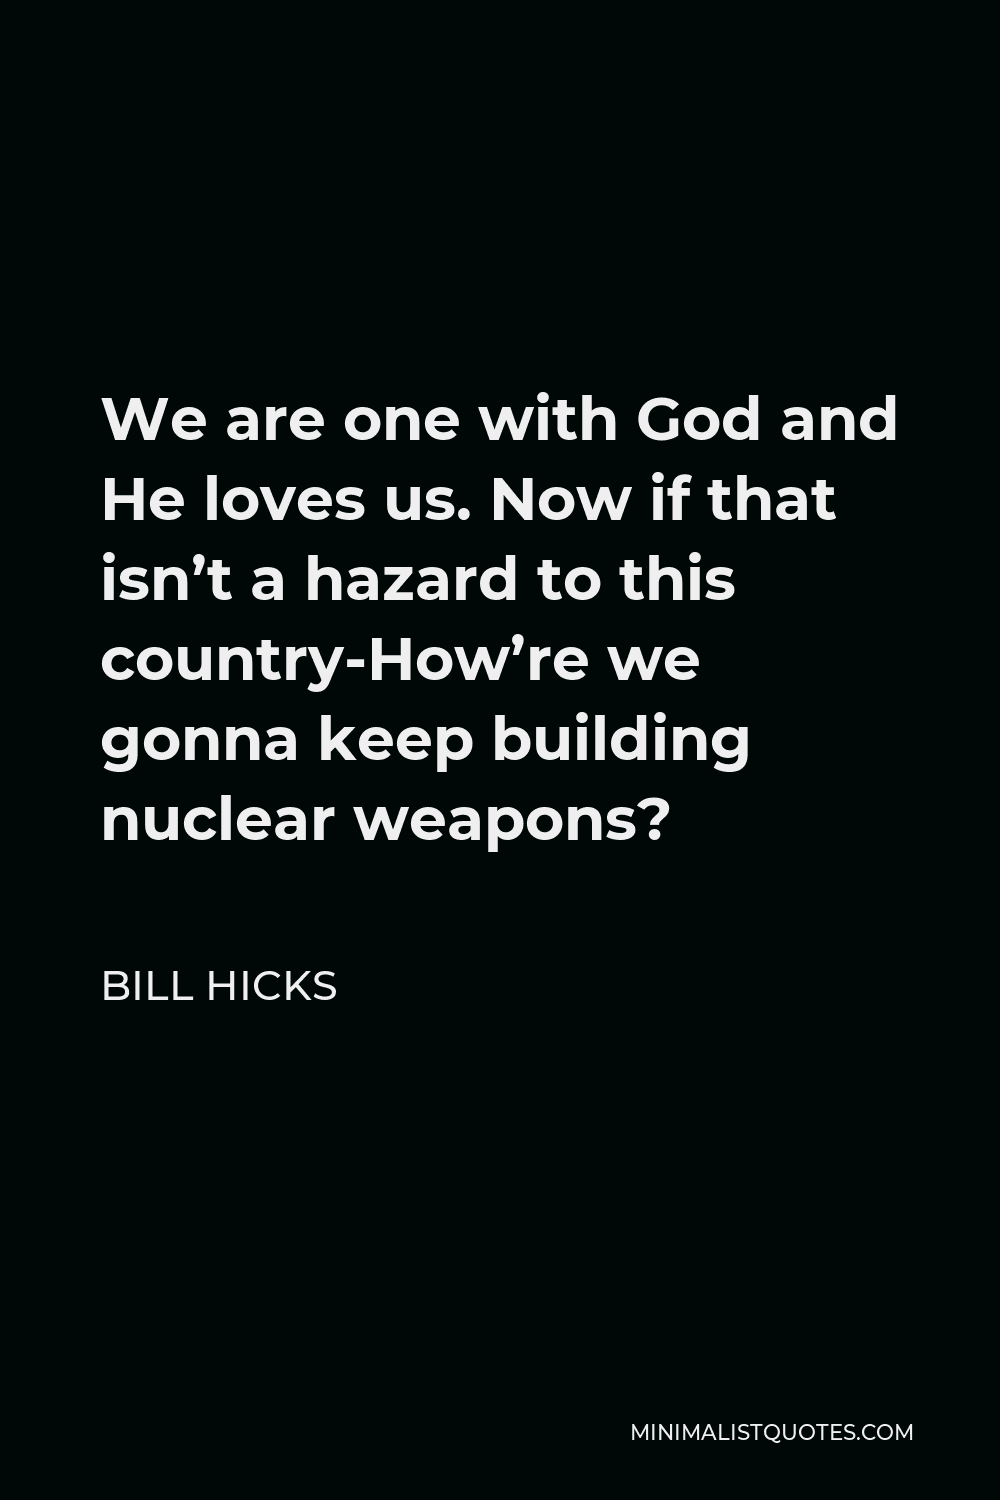 Bill Hicks Quote - We are one with God and He loves us. Now if that isn’t a hazard to this country-How’re we gonna keep building nuclear weapons?